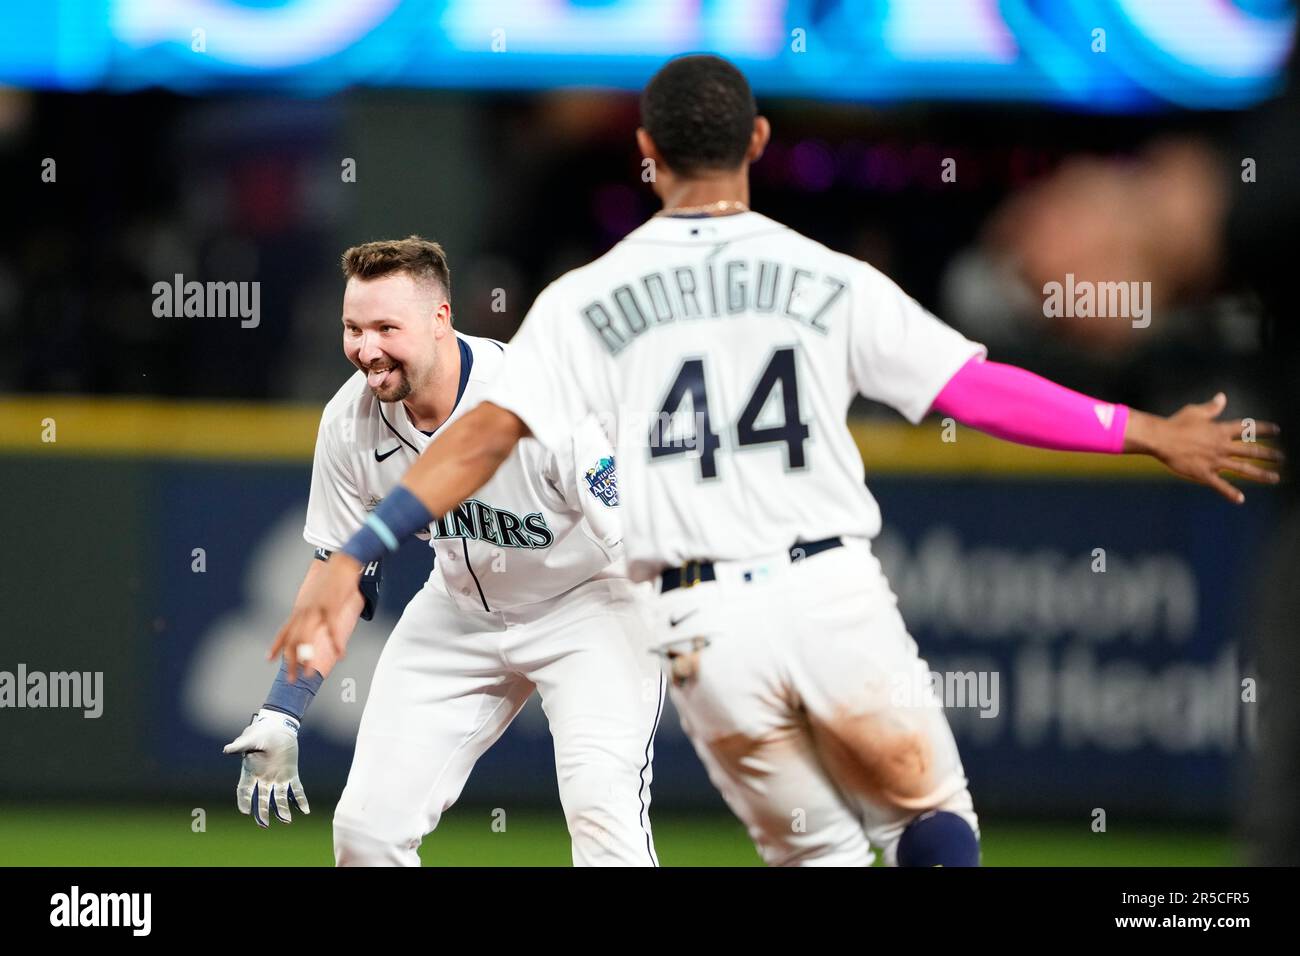 Seattle Mariners' Cal Raleigh reacts after hitting a walk-off single to win  the game 1-0 over the New York Yankees as teammate Julio Rodriguez (44)  runs towards him in a baseball game